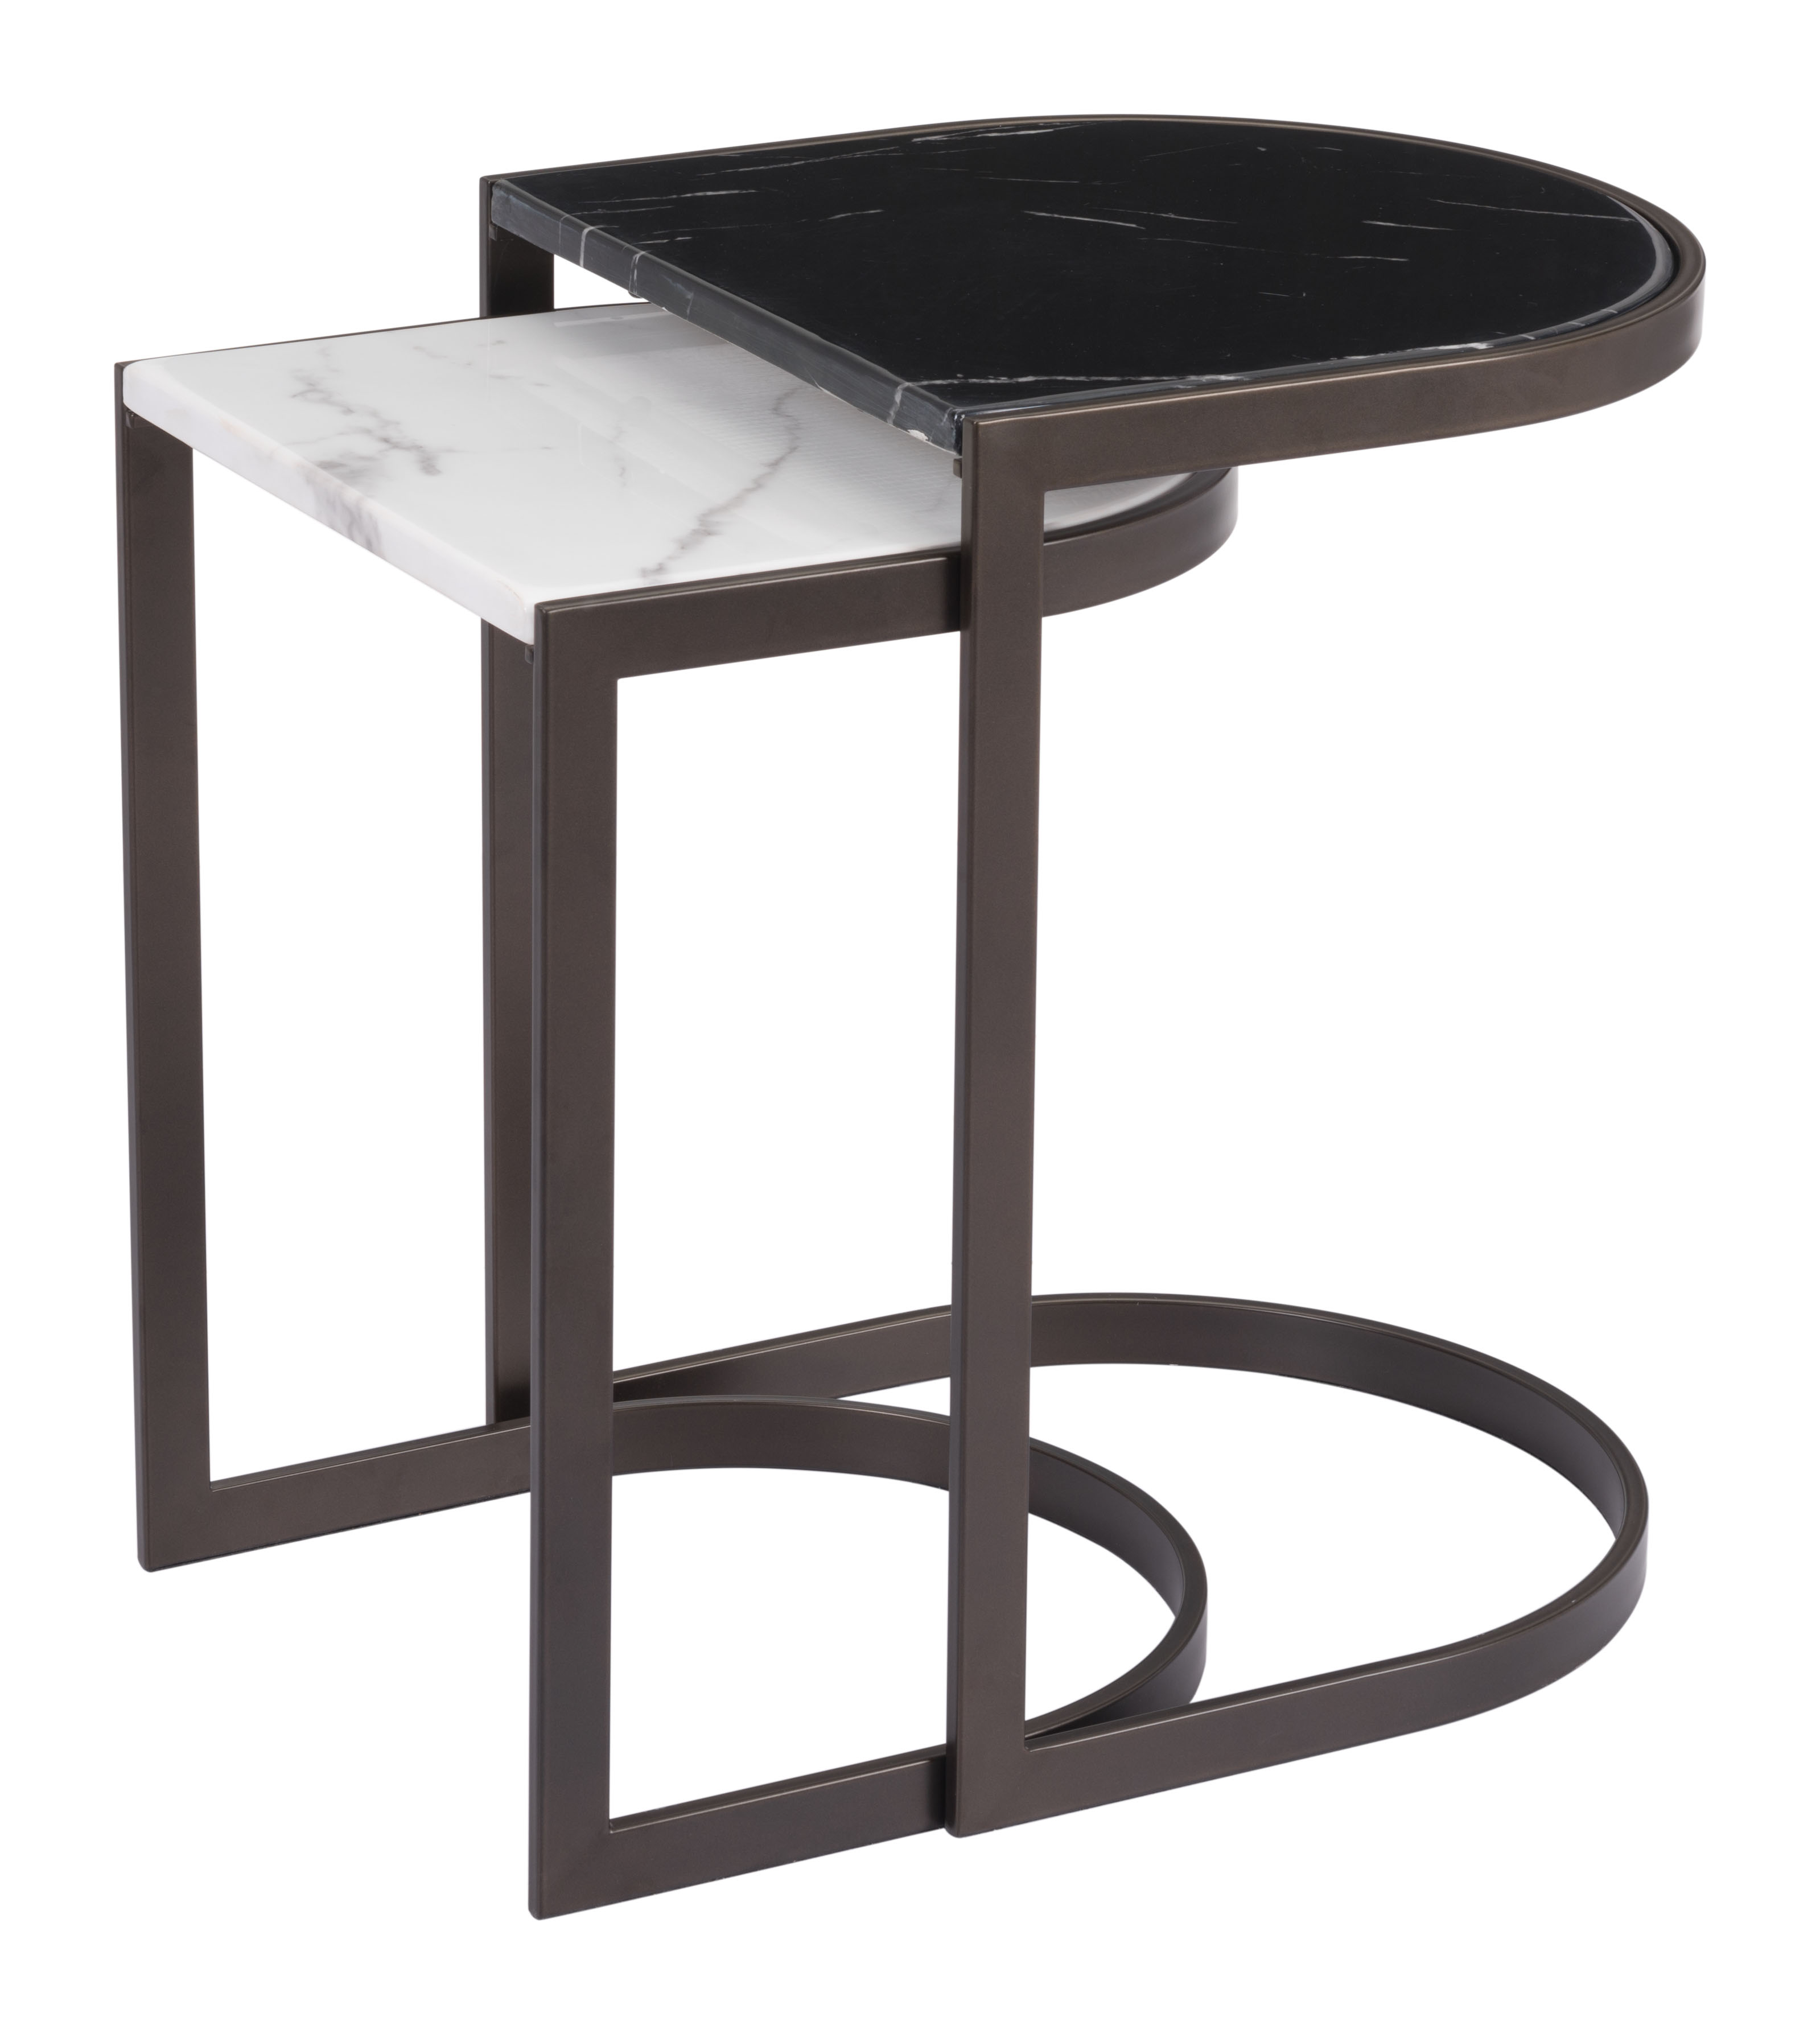 Zuo Modern Stanton nesting end tables